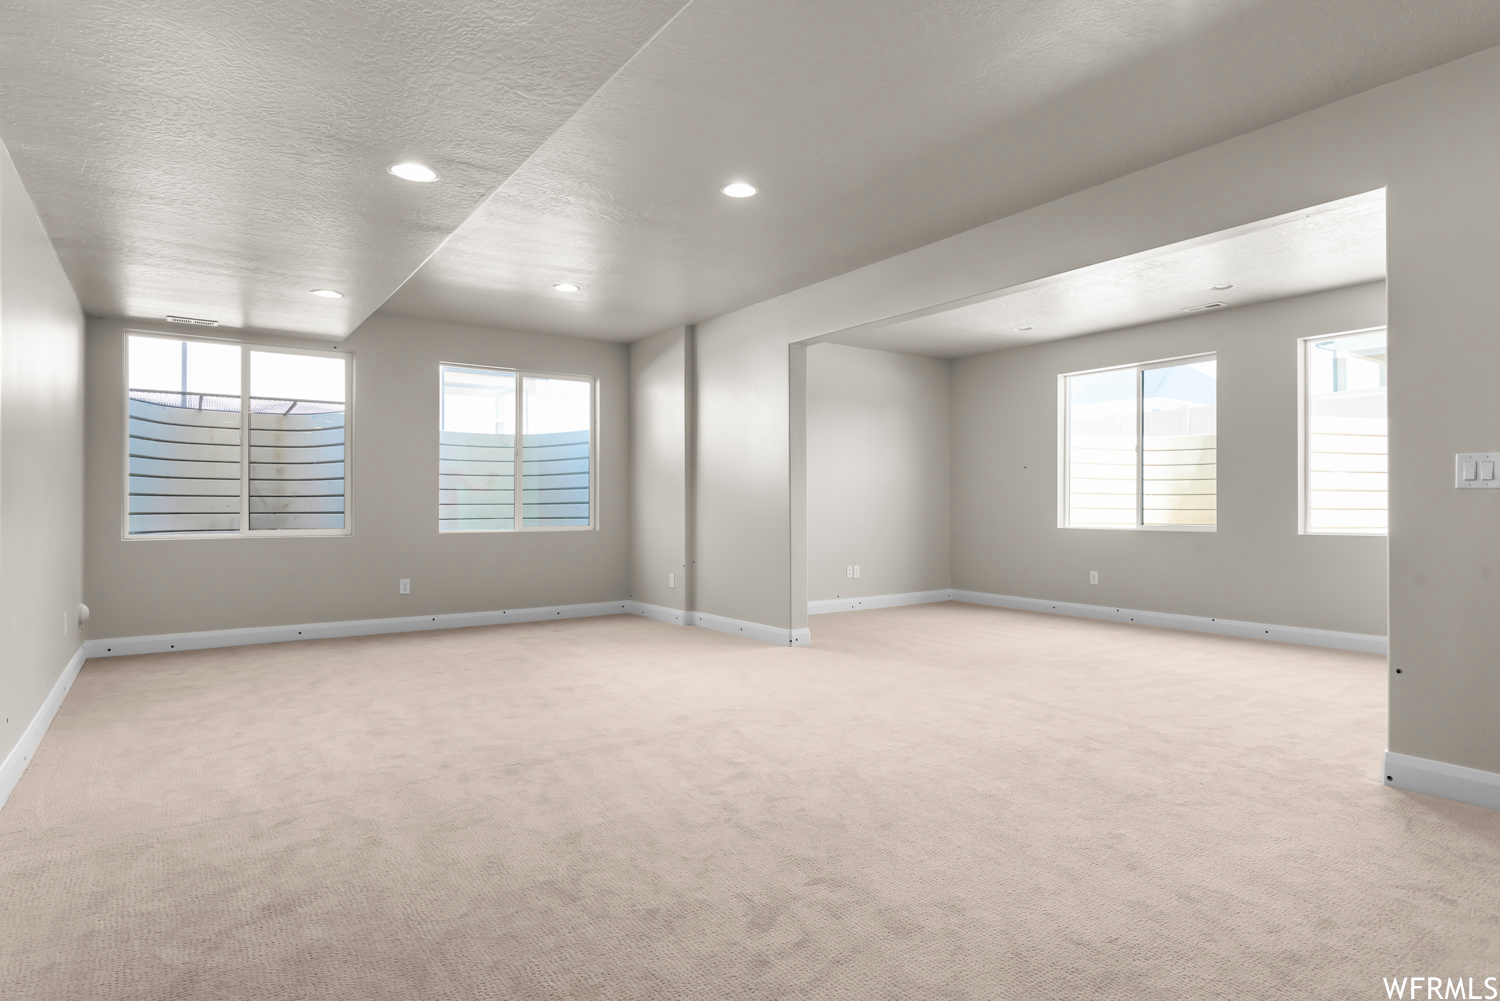 Spare room featuring light colored carpet, a textured ceiling, and a wealth of natural light